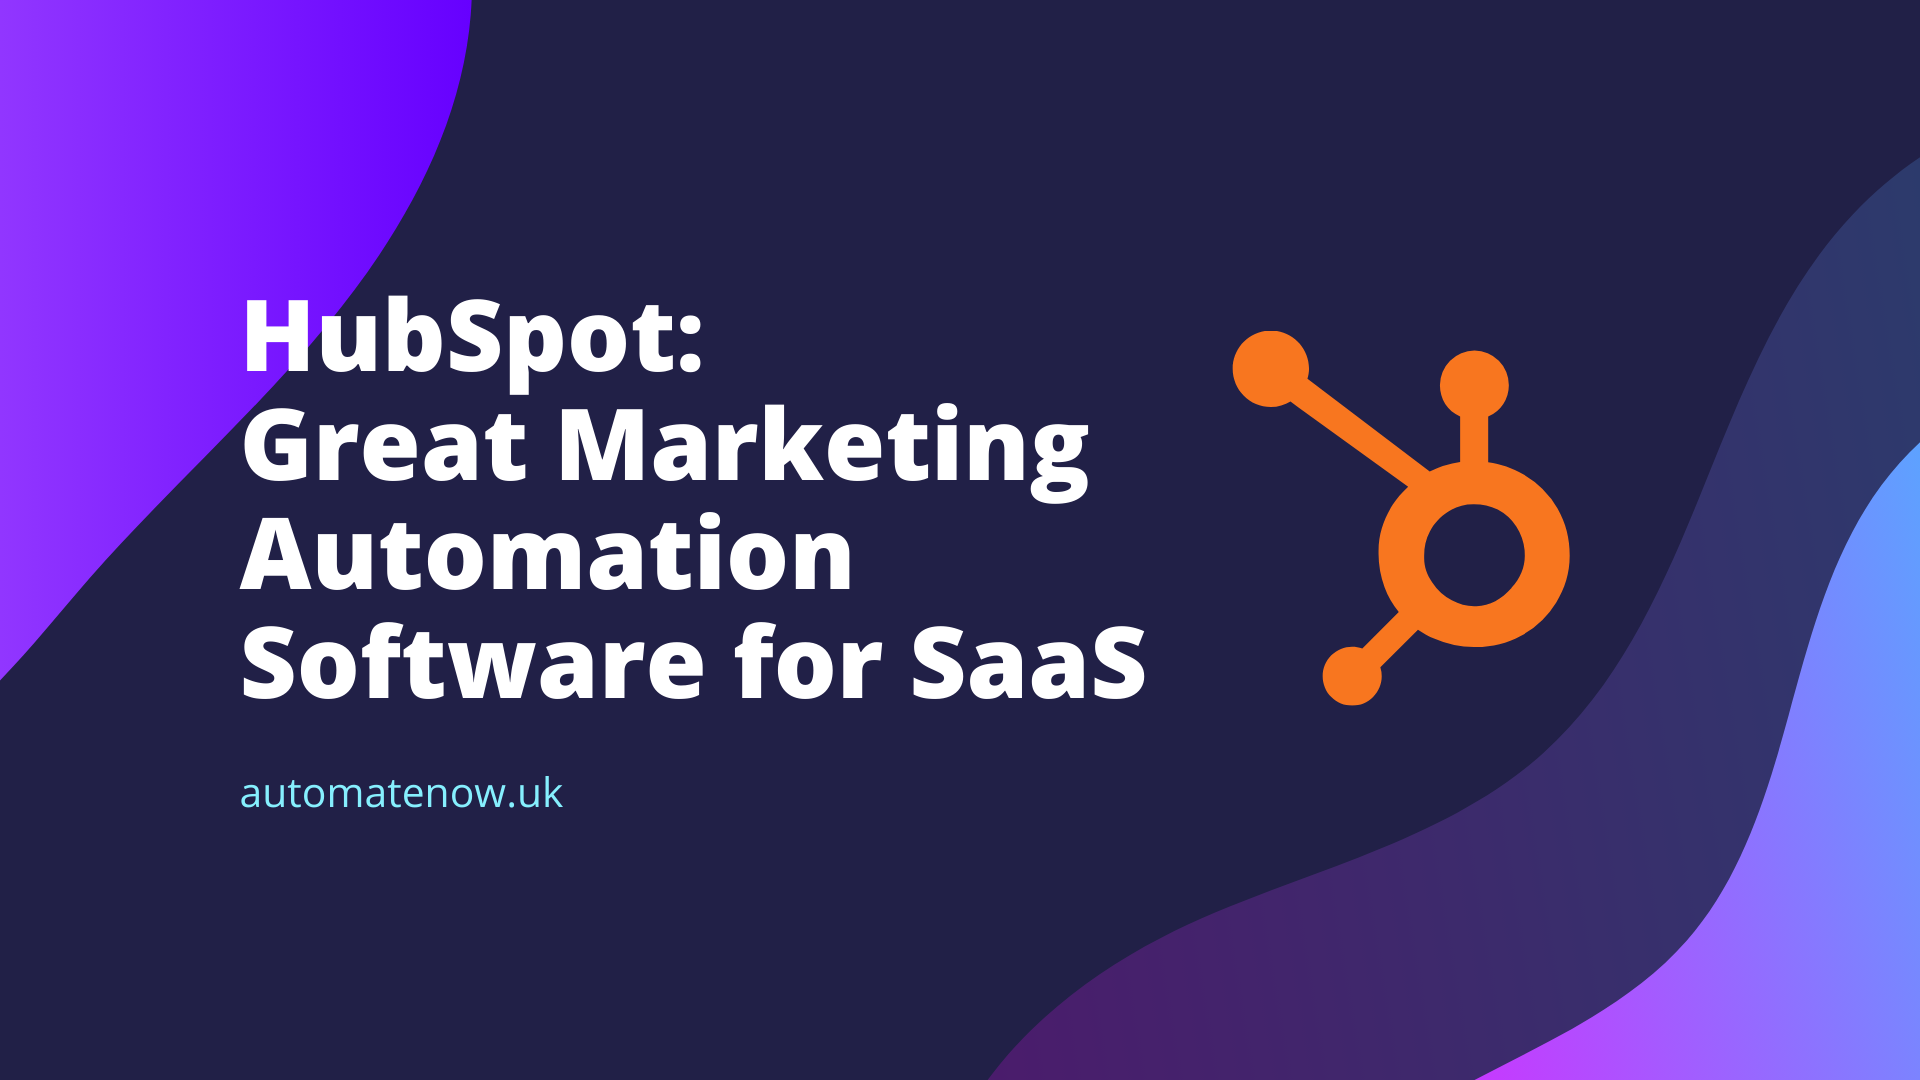 HubSpot: Great Marketing Automation Software for SaaS